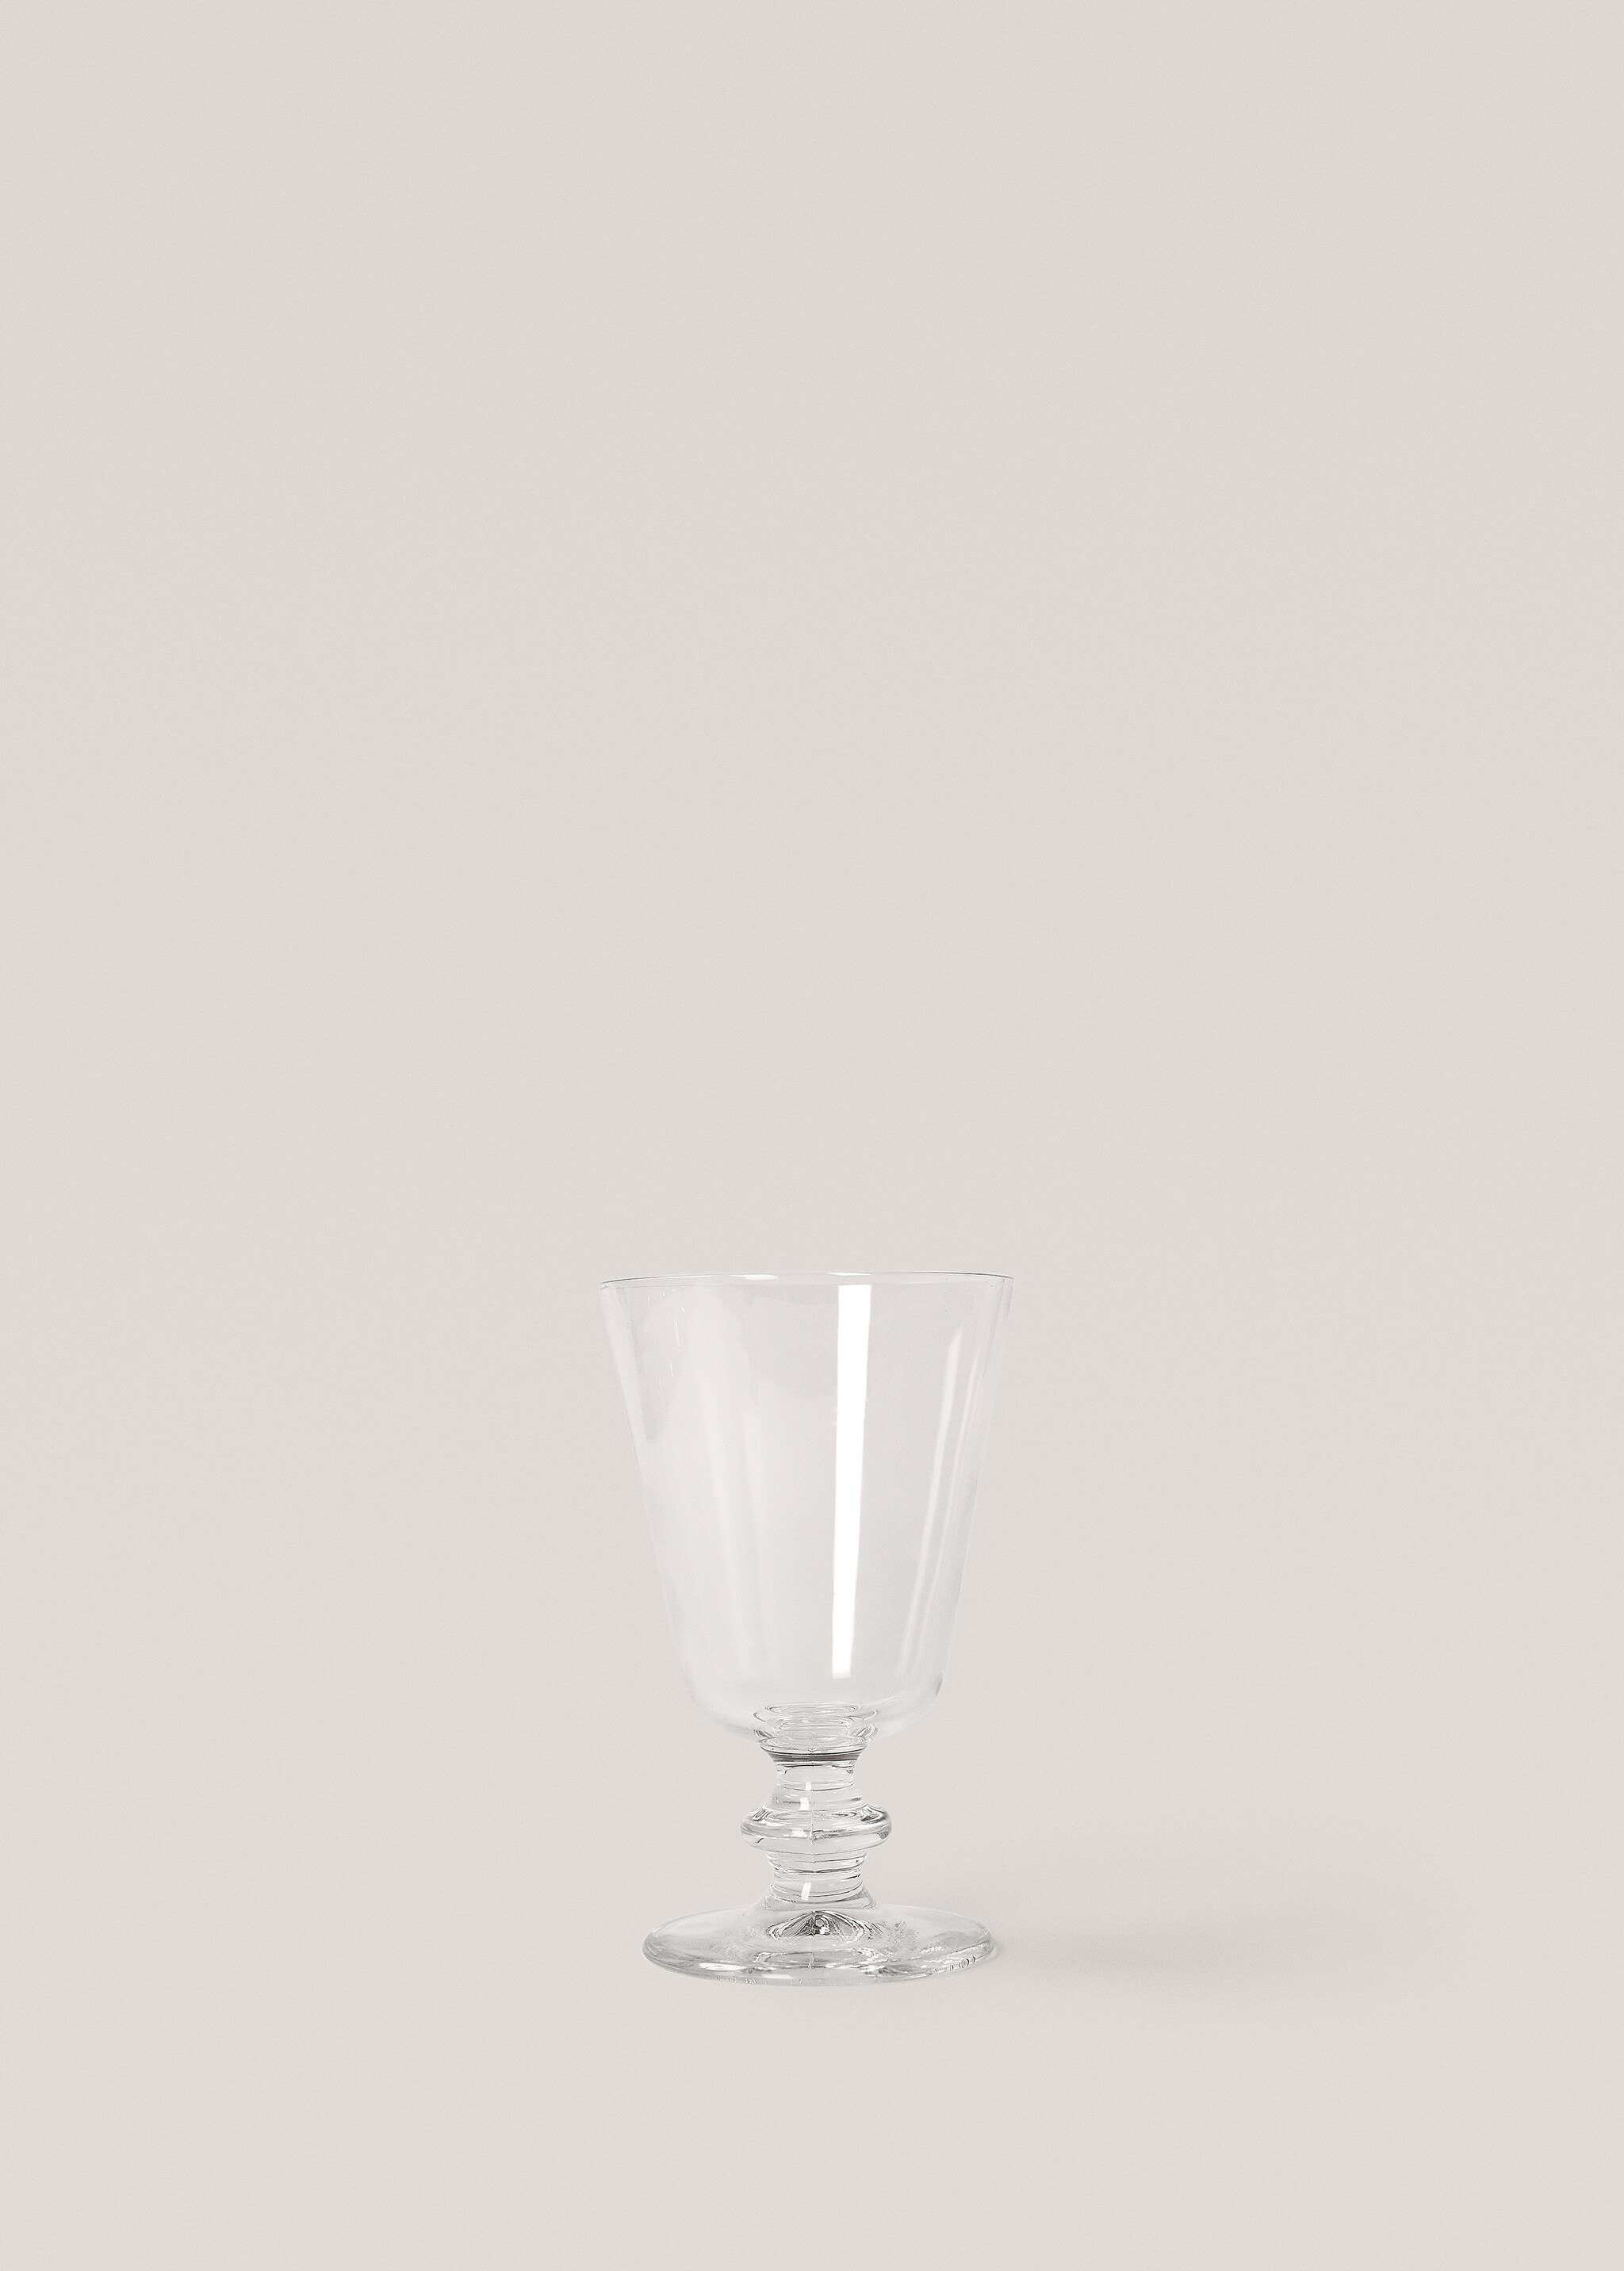 Glass goblet - Article without model